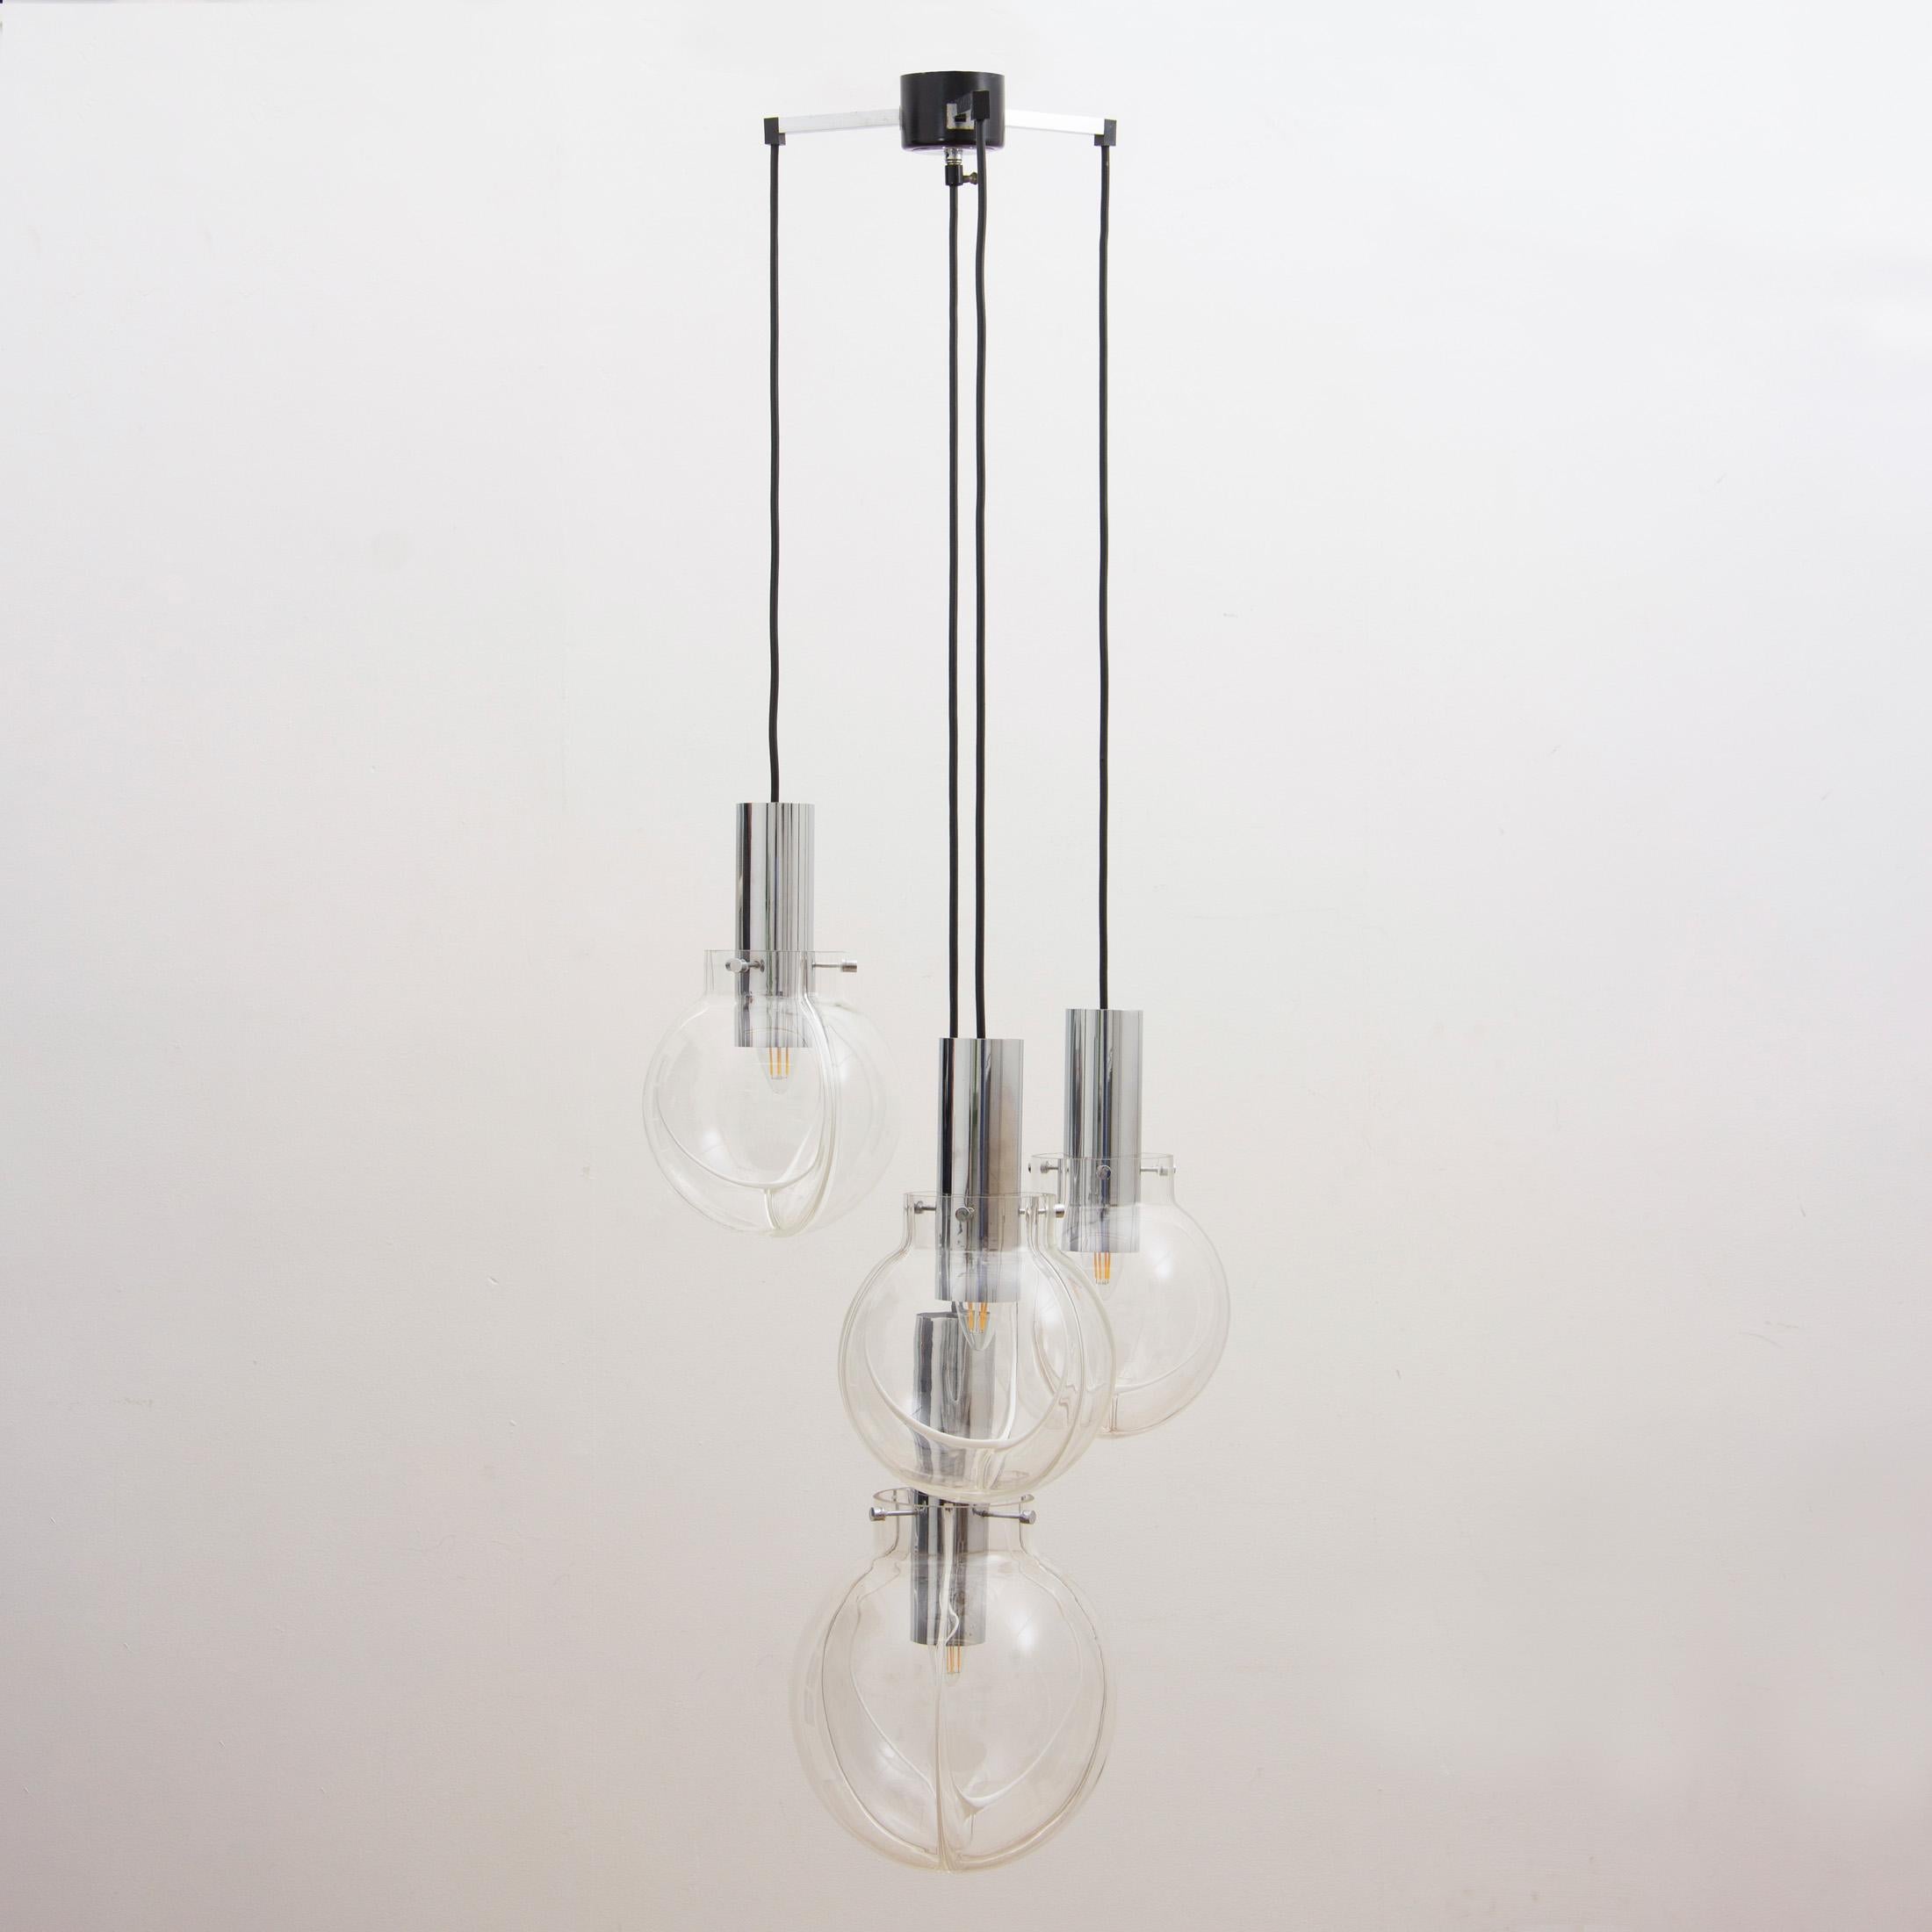 An usual and striking 1970s German clear and white glass hanging light with four cascading globes. Each globe features an unusual internal white glass ridge which the light reflects off to create a warm and soft glow. The lowest hanging globe is